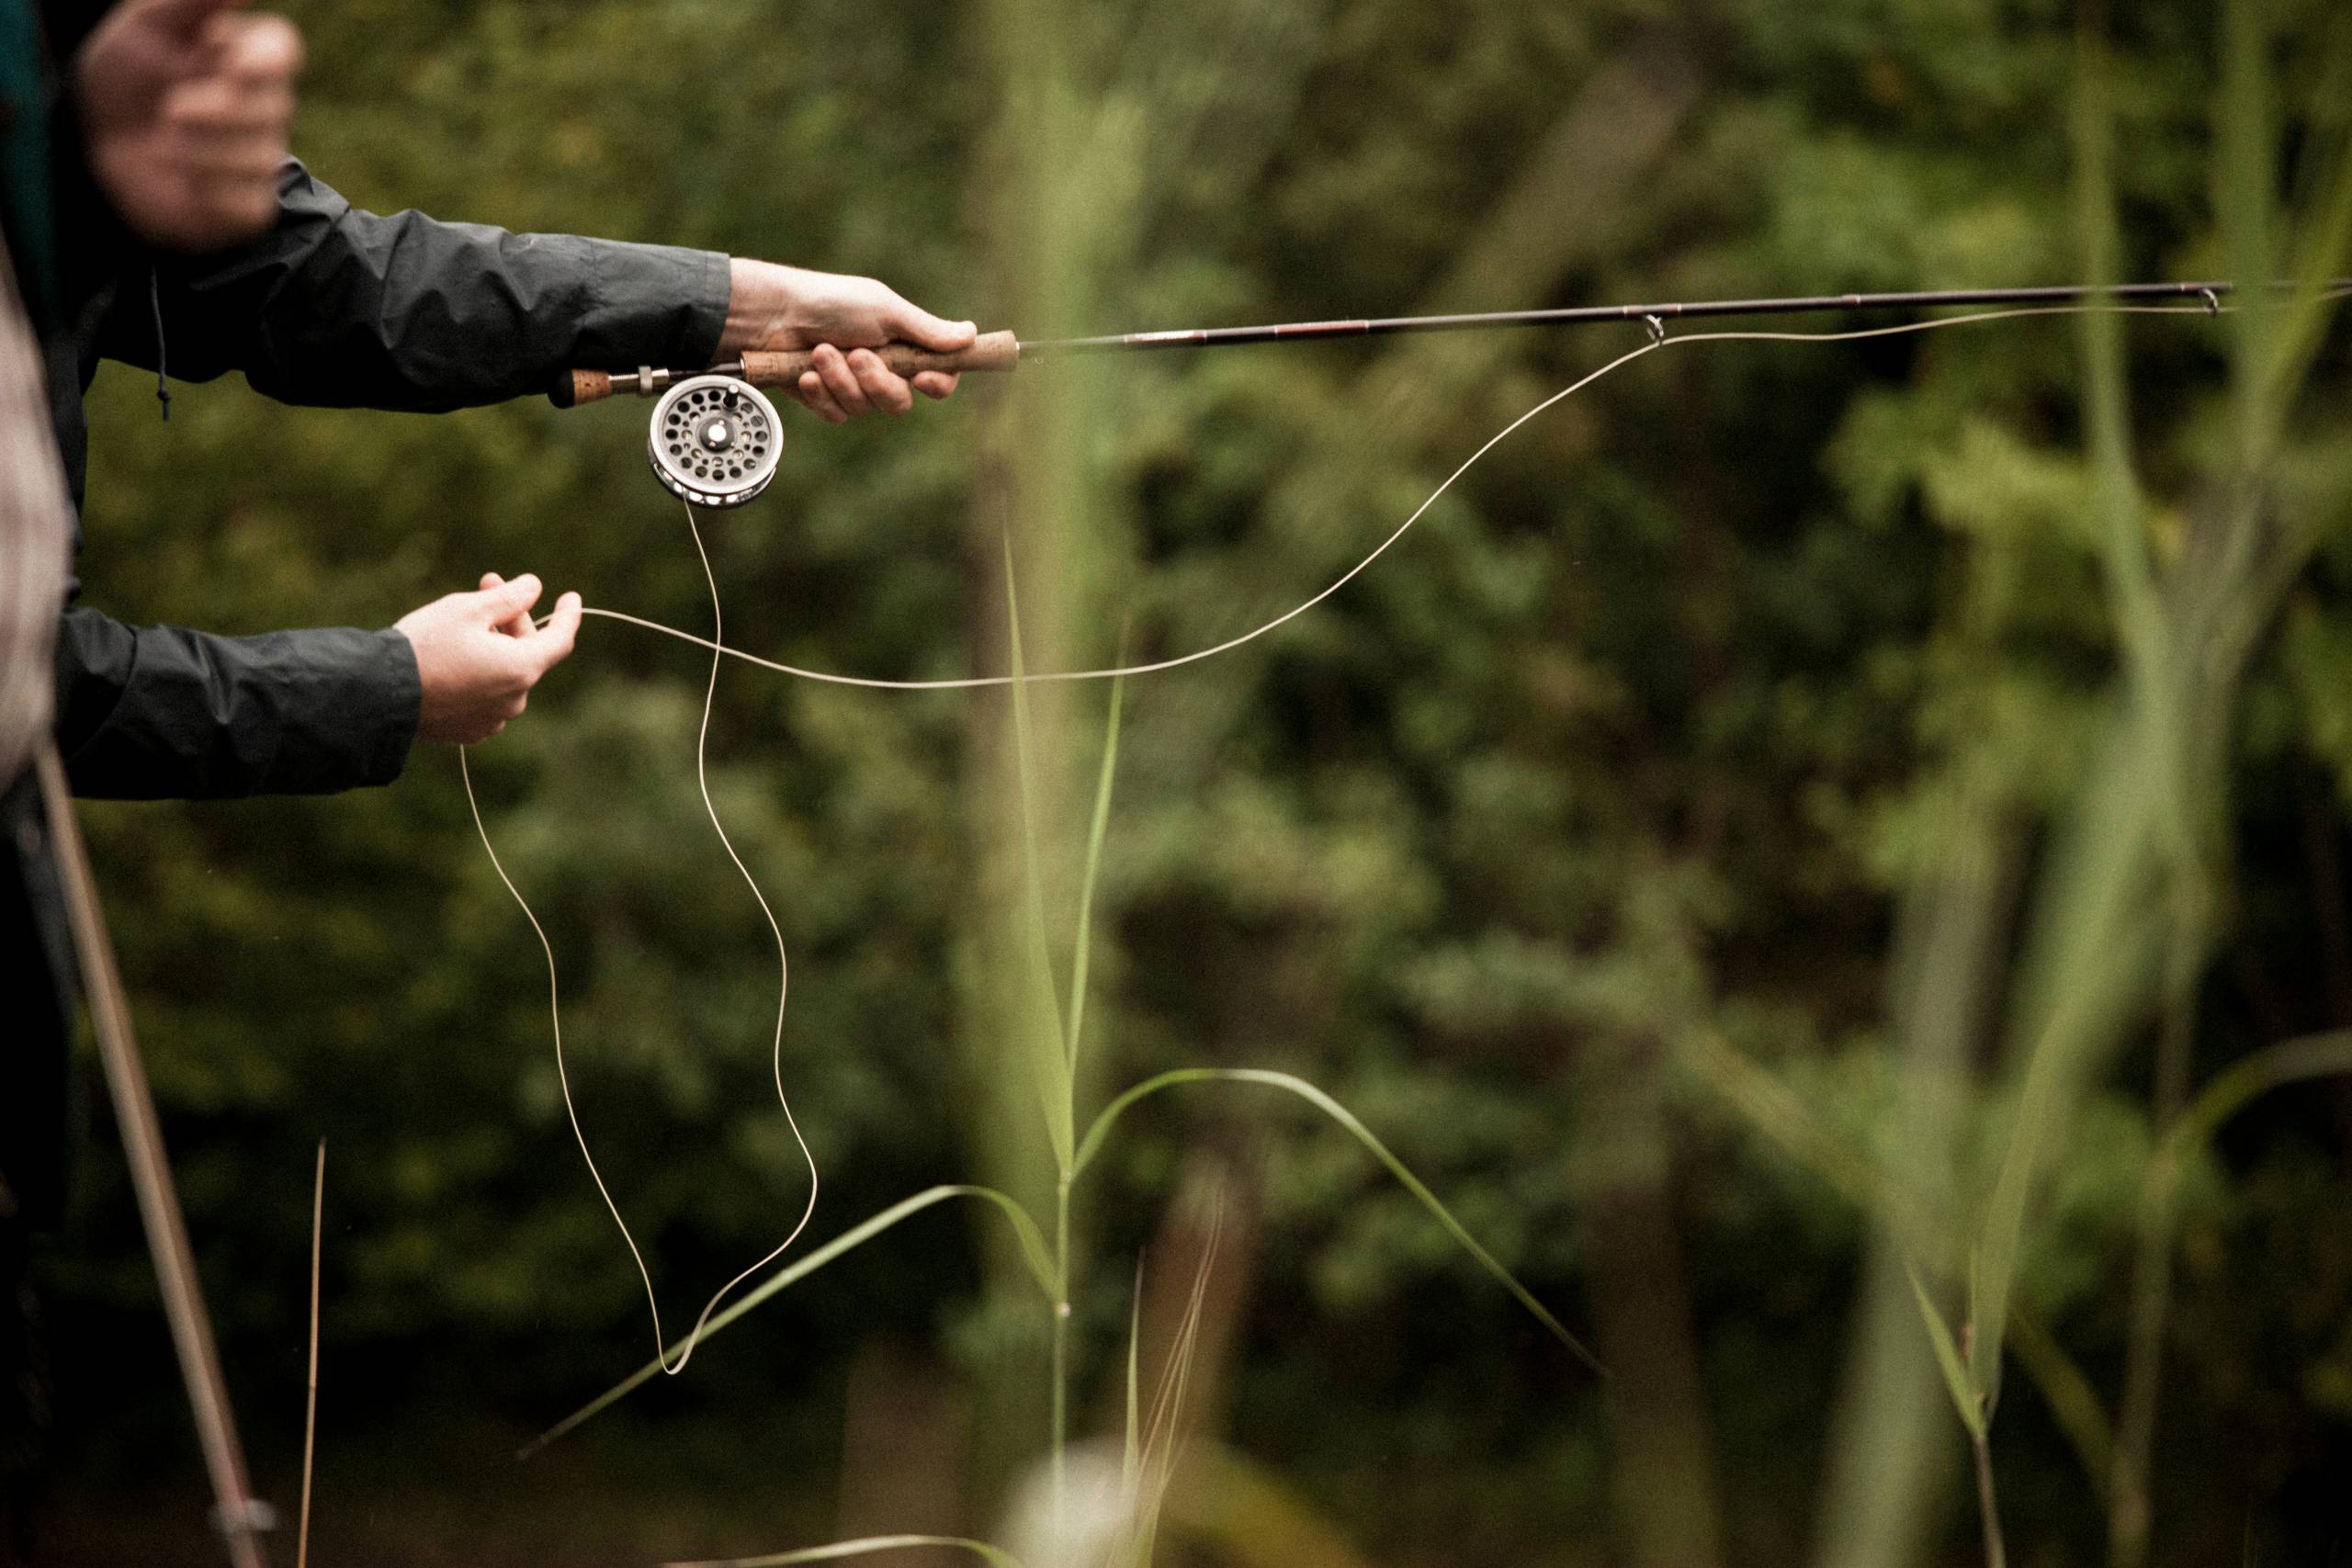 Premier Angling – Specialists in Top Quality Fly Fishing and Fly